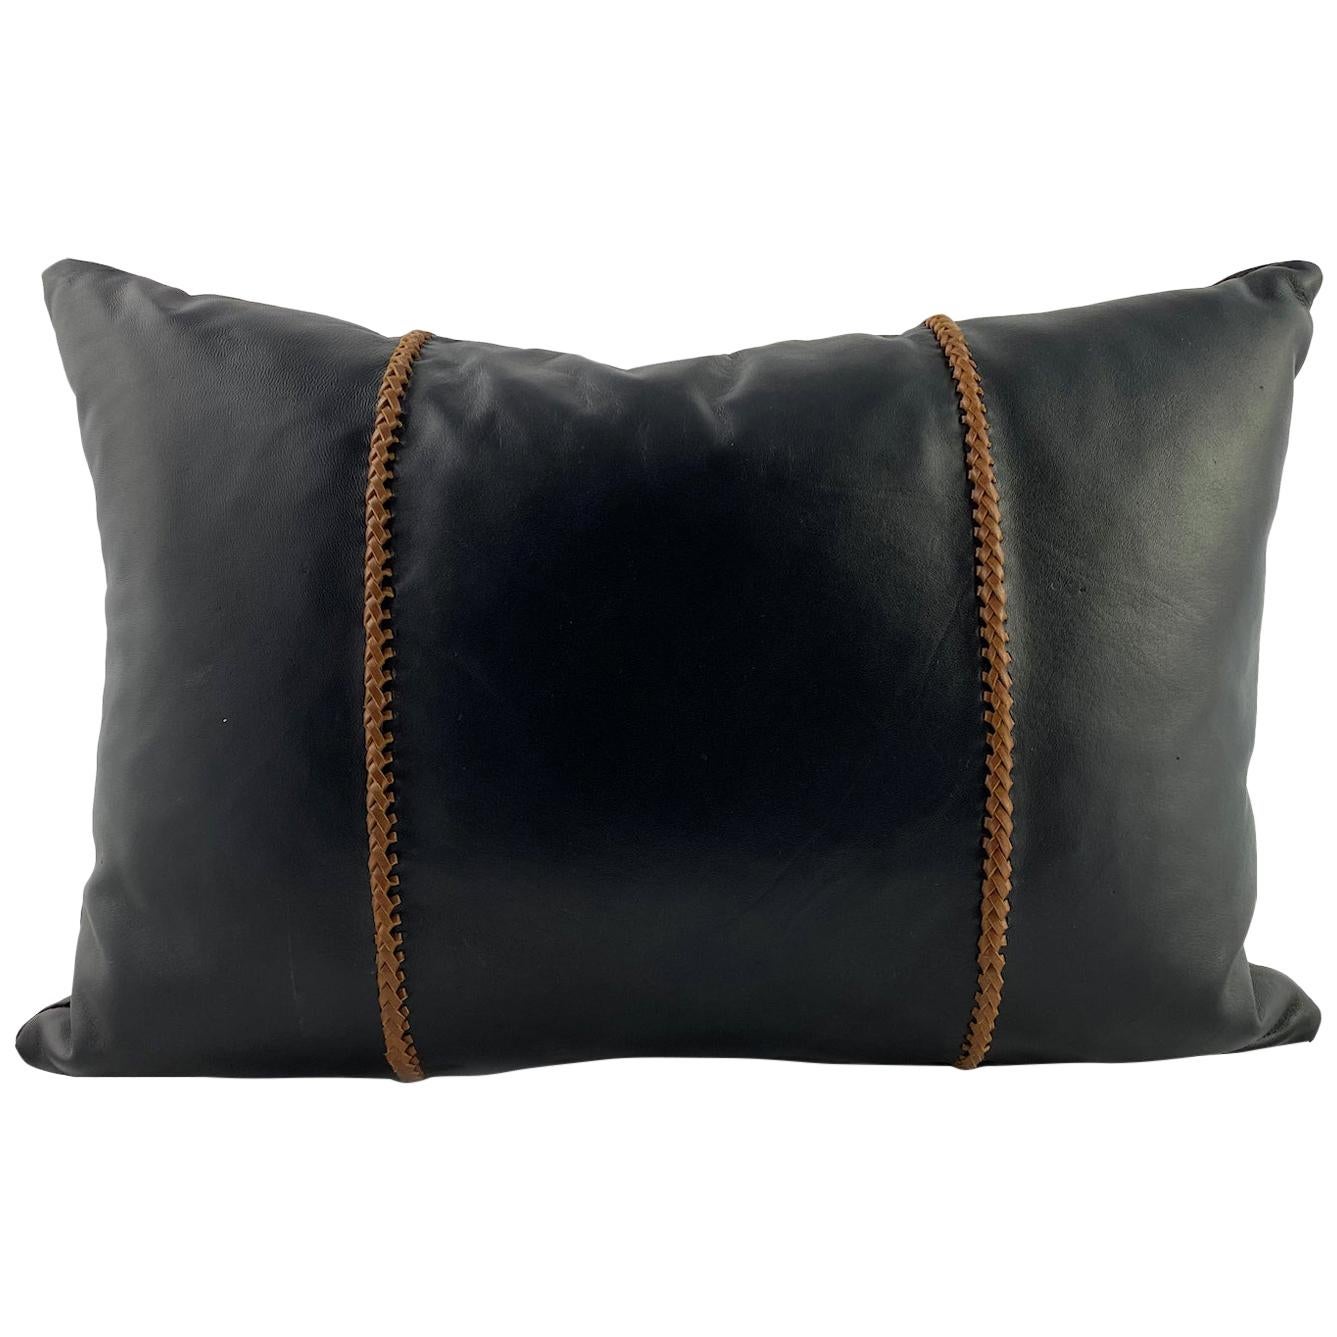 Black Leather Pillow with Tan Leather Cross Stitch, Lumbar Cushion